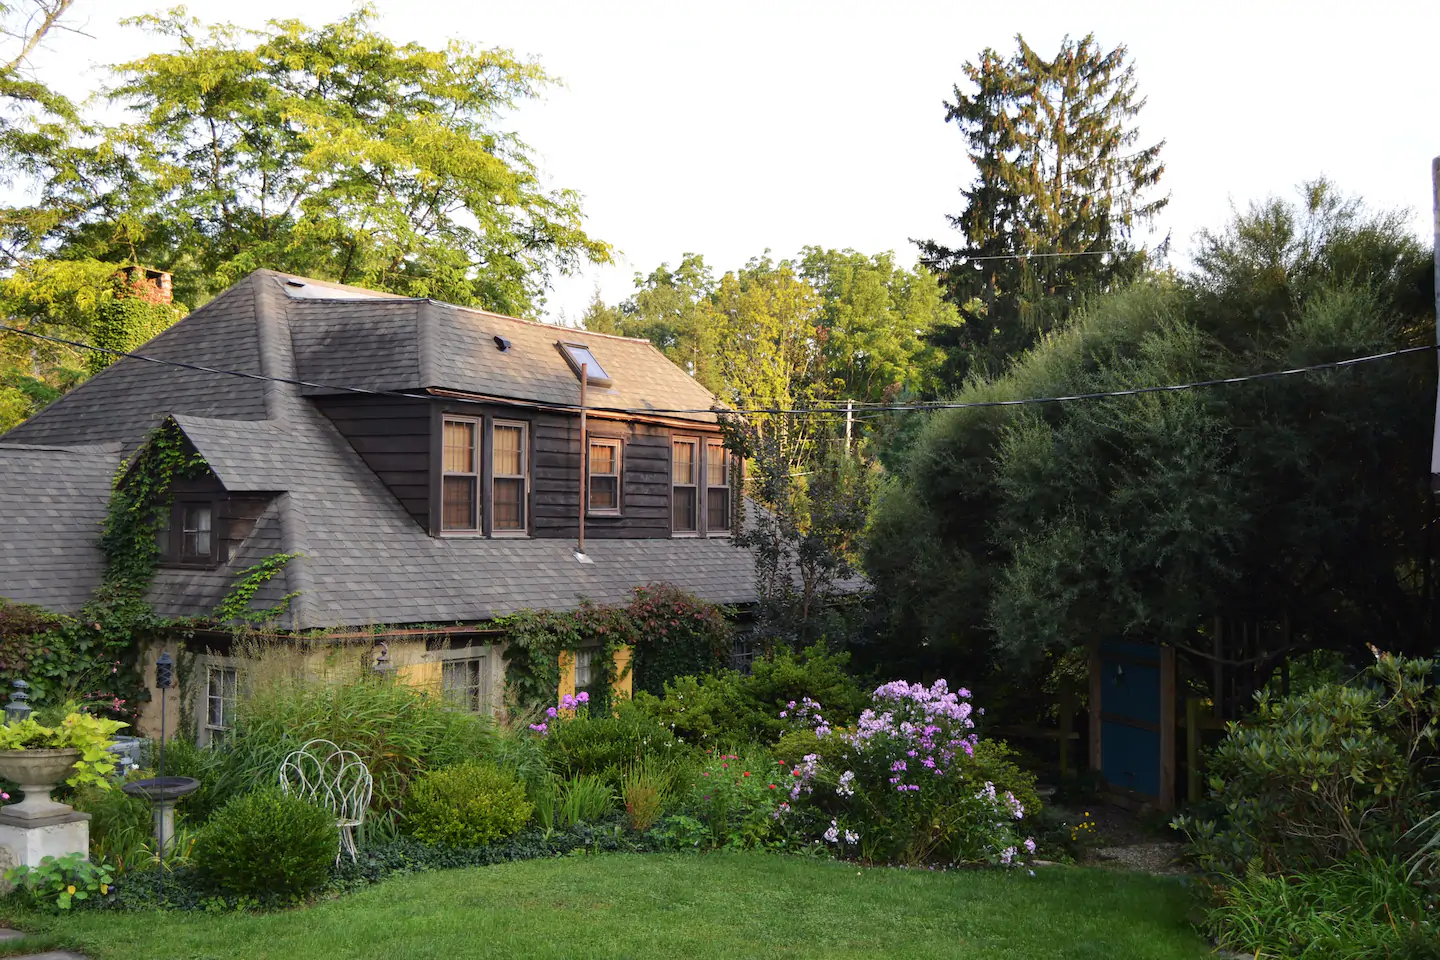 Beautiful house with lovely flowering gardens vies as one of the best Airbnb in Pennsylvania